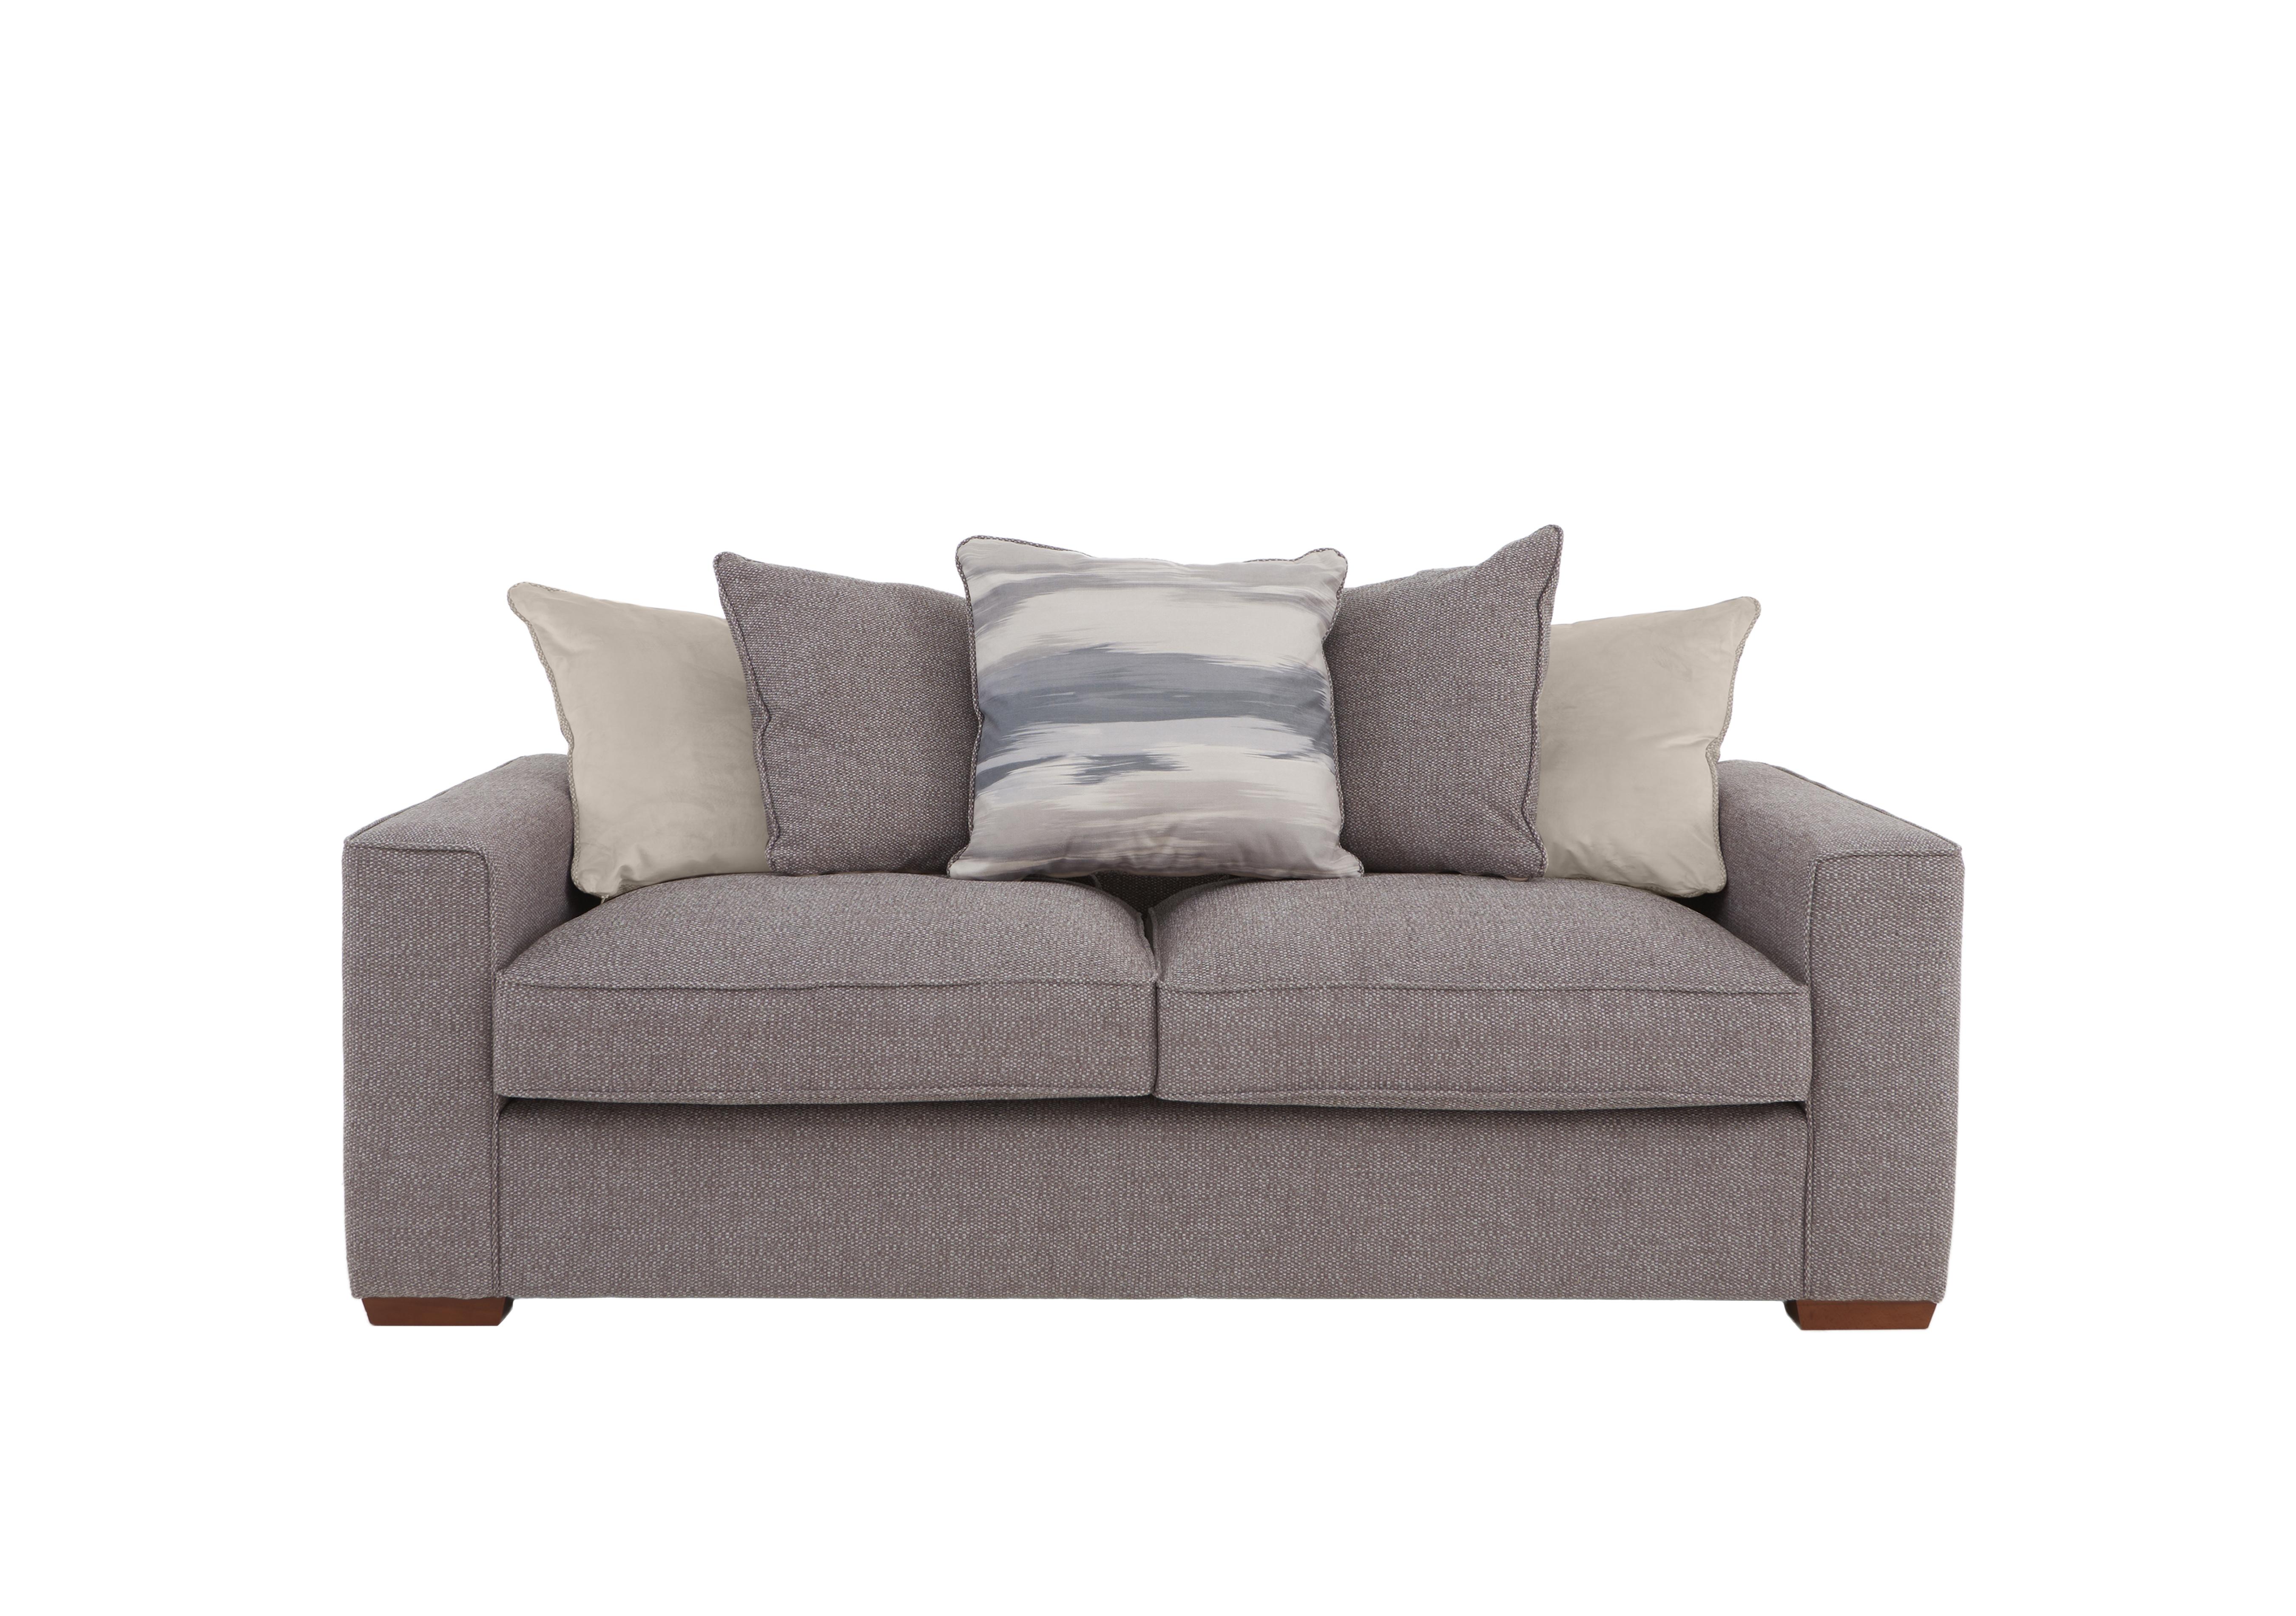 Cory 3 Seater Fabric Scatter Back Sofa in Dallas Taupe Taupe Pack on Furniture Village